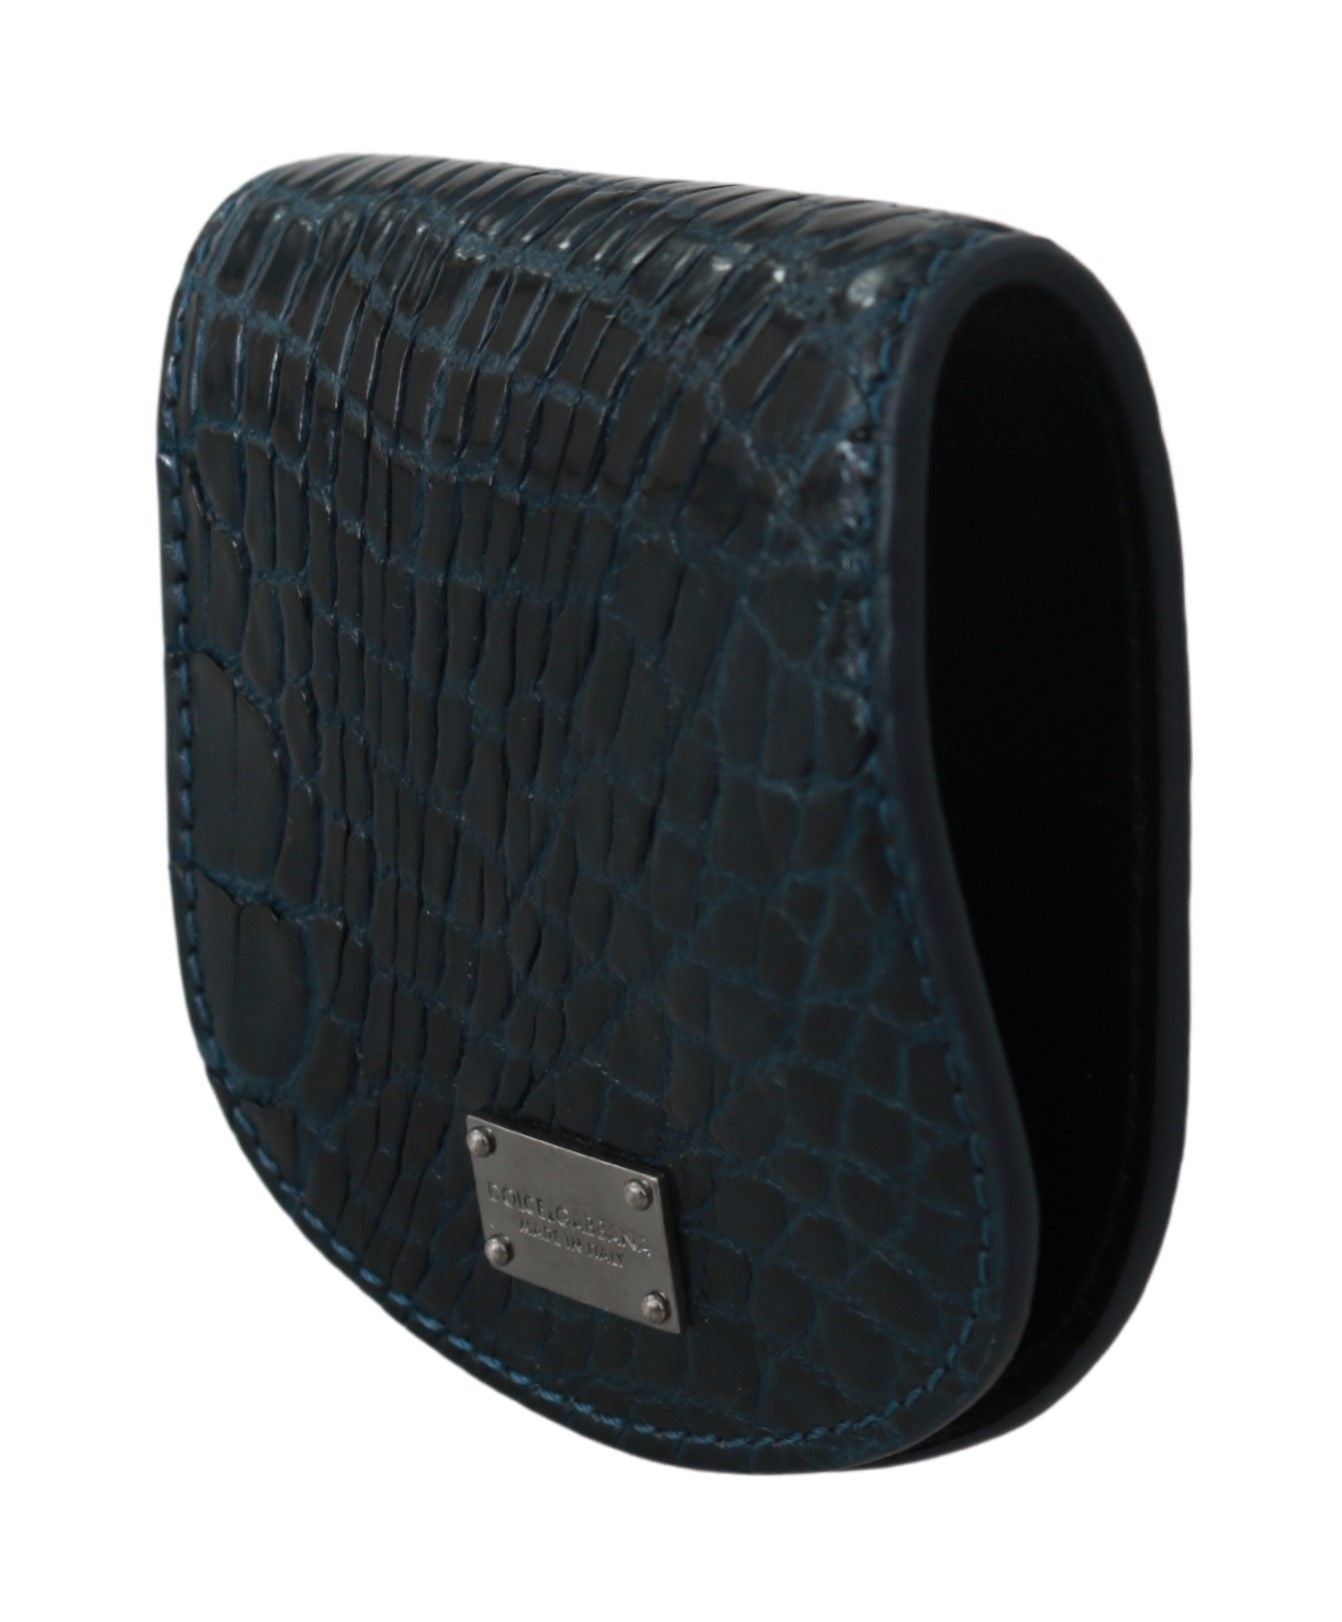 Blue Exotic Skins Condom Case Holder Pocket - Designed by Dolce & Gabbana Available to Buy at a Discounted Price on Moon Behind The Hill Online Designer Discount Store